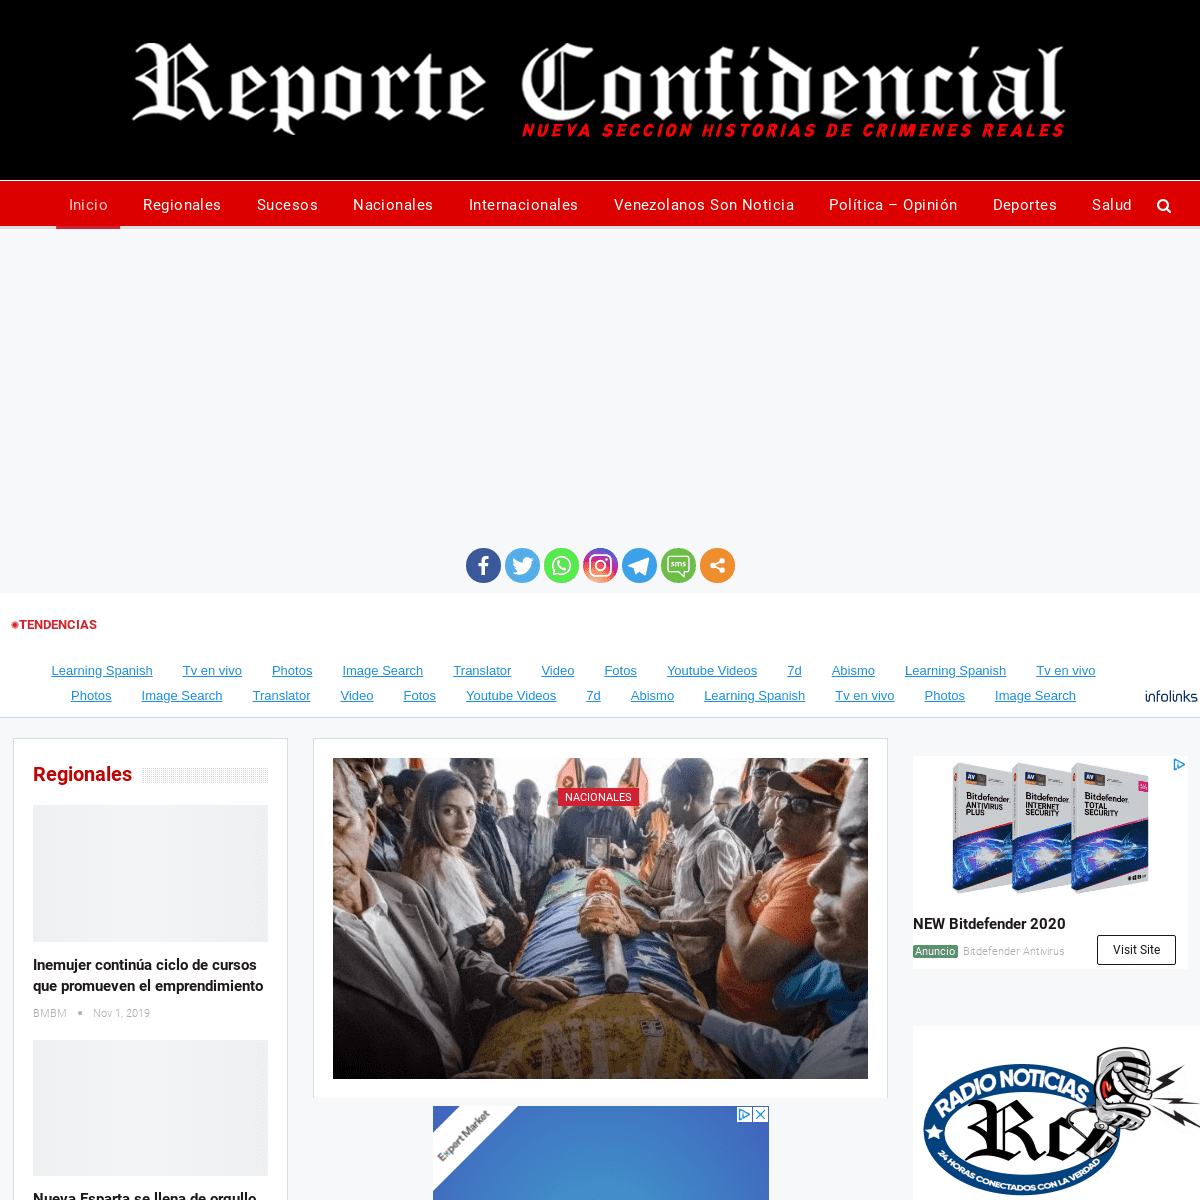 A complete backup of reporteconfidencial.info